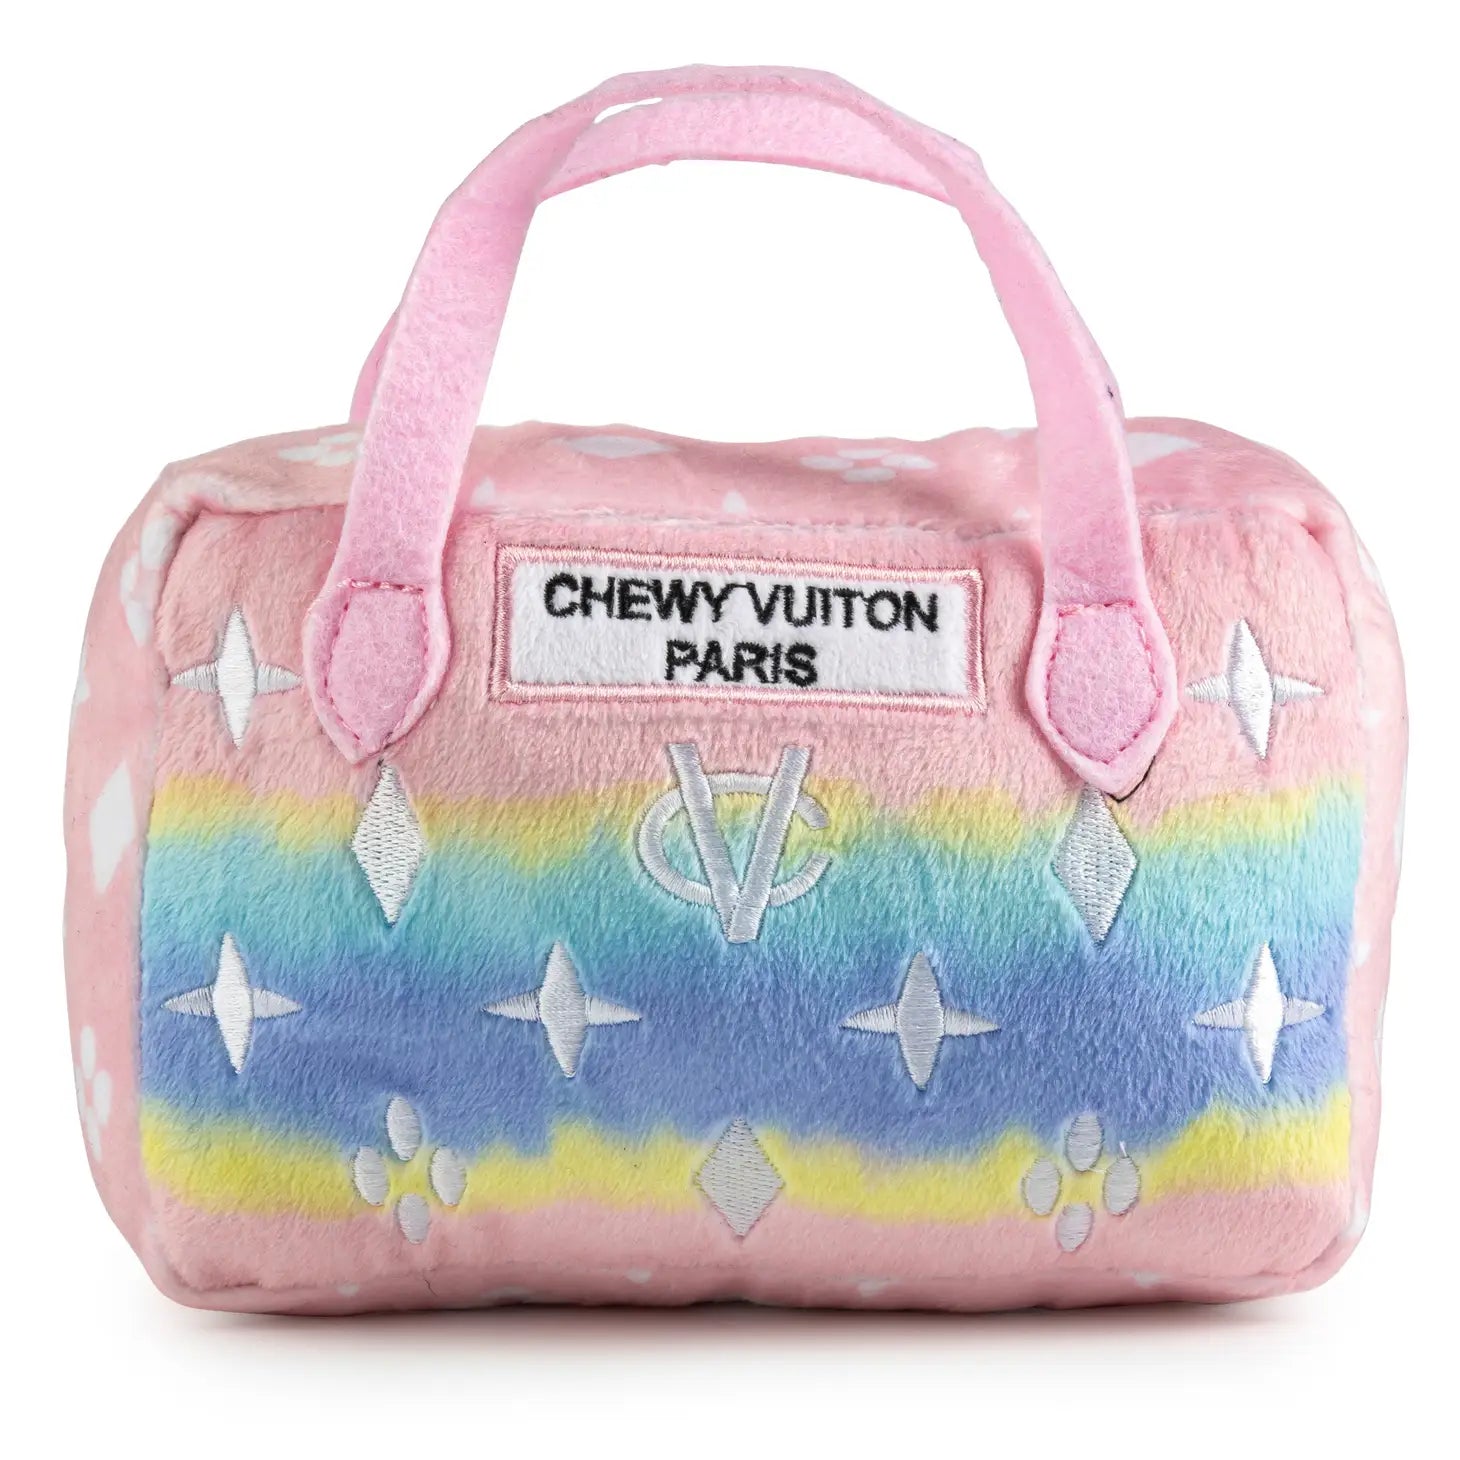 Haute Diggity Dog - Pink Ombre Chewy Vuiton Handbag Dog Toy